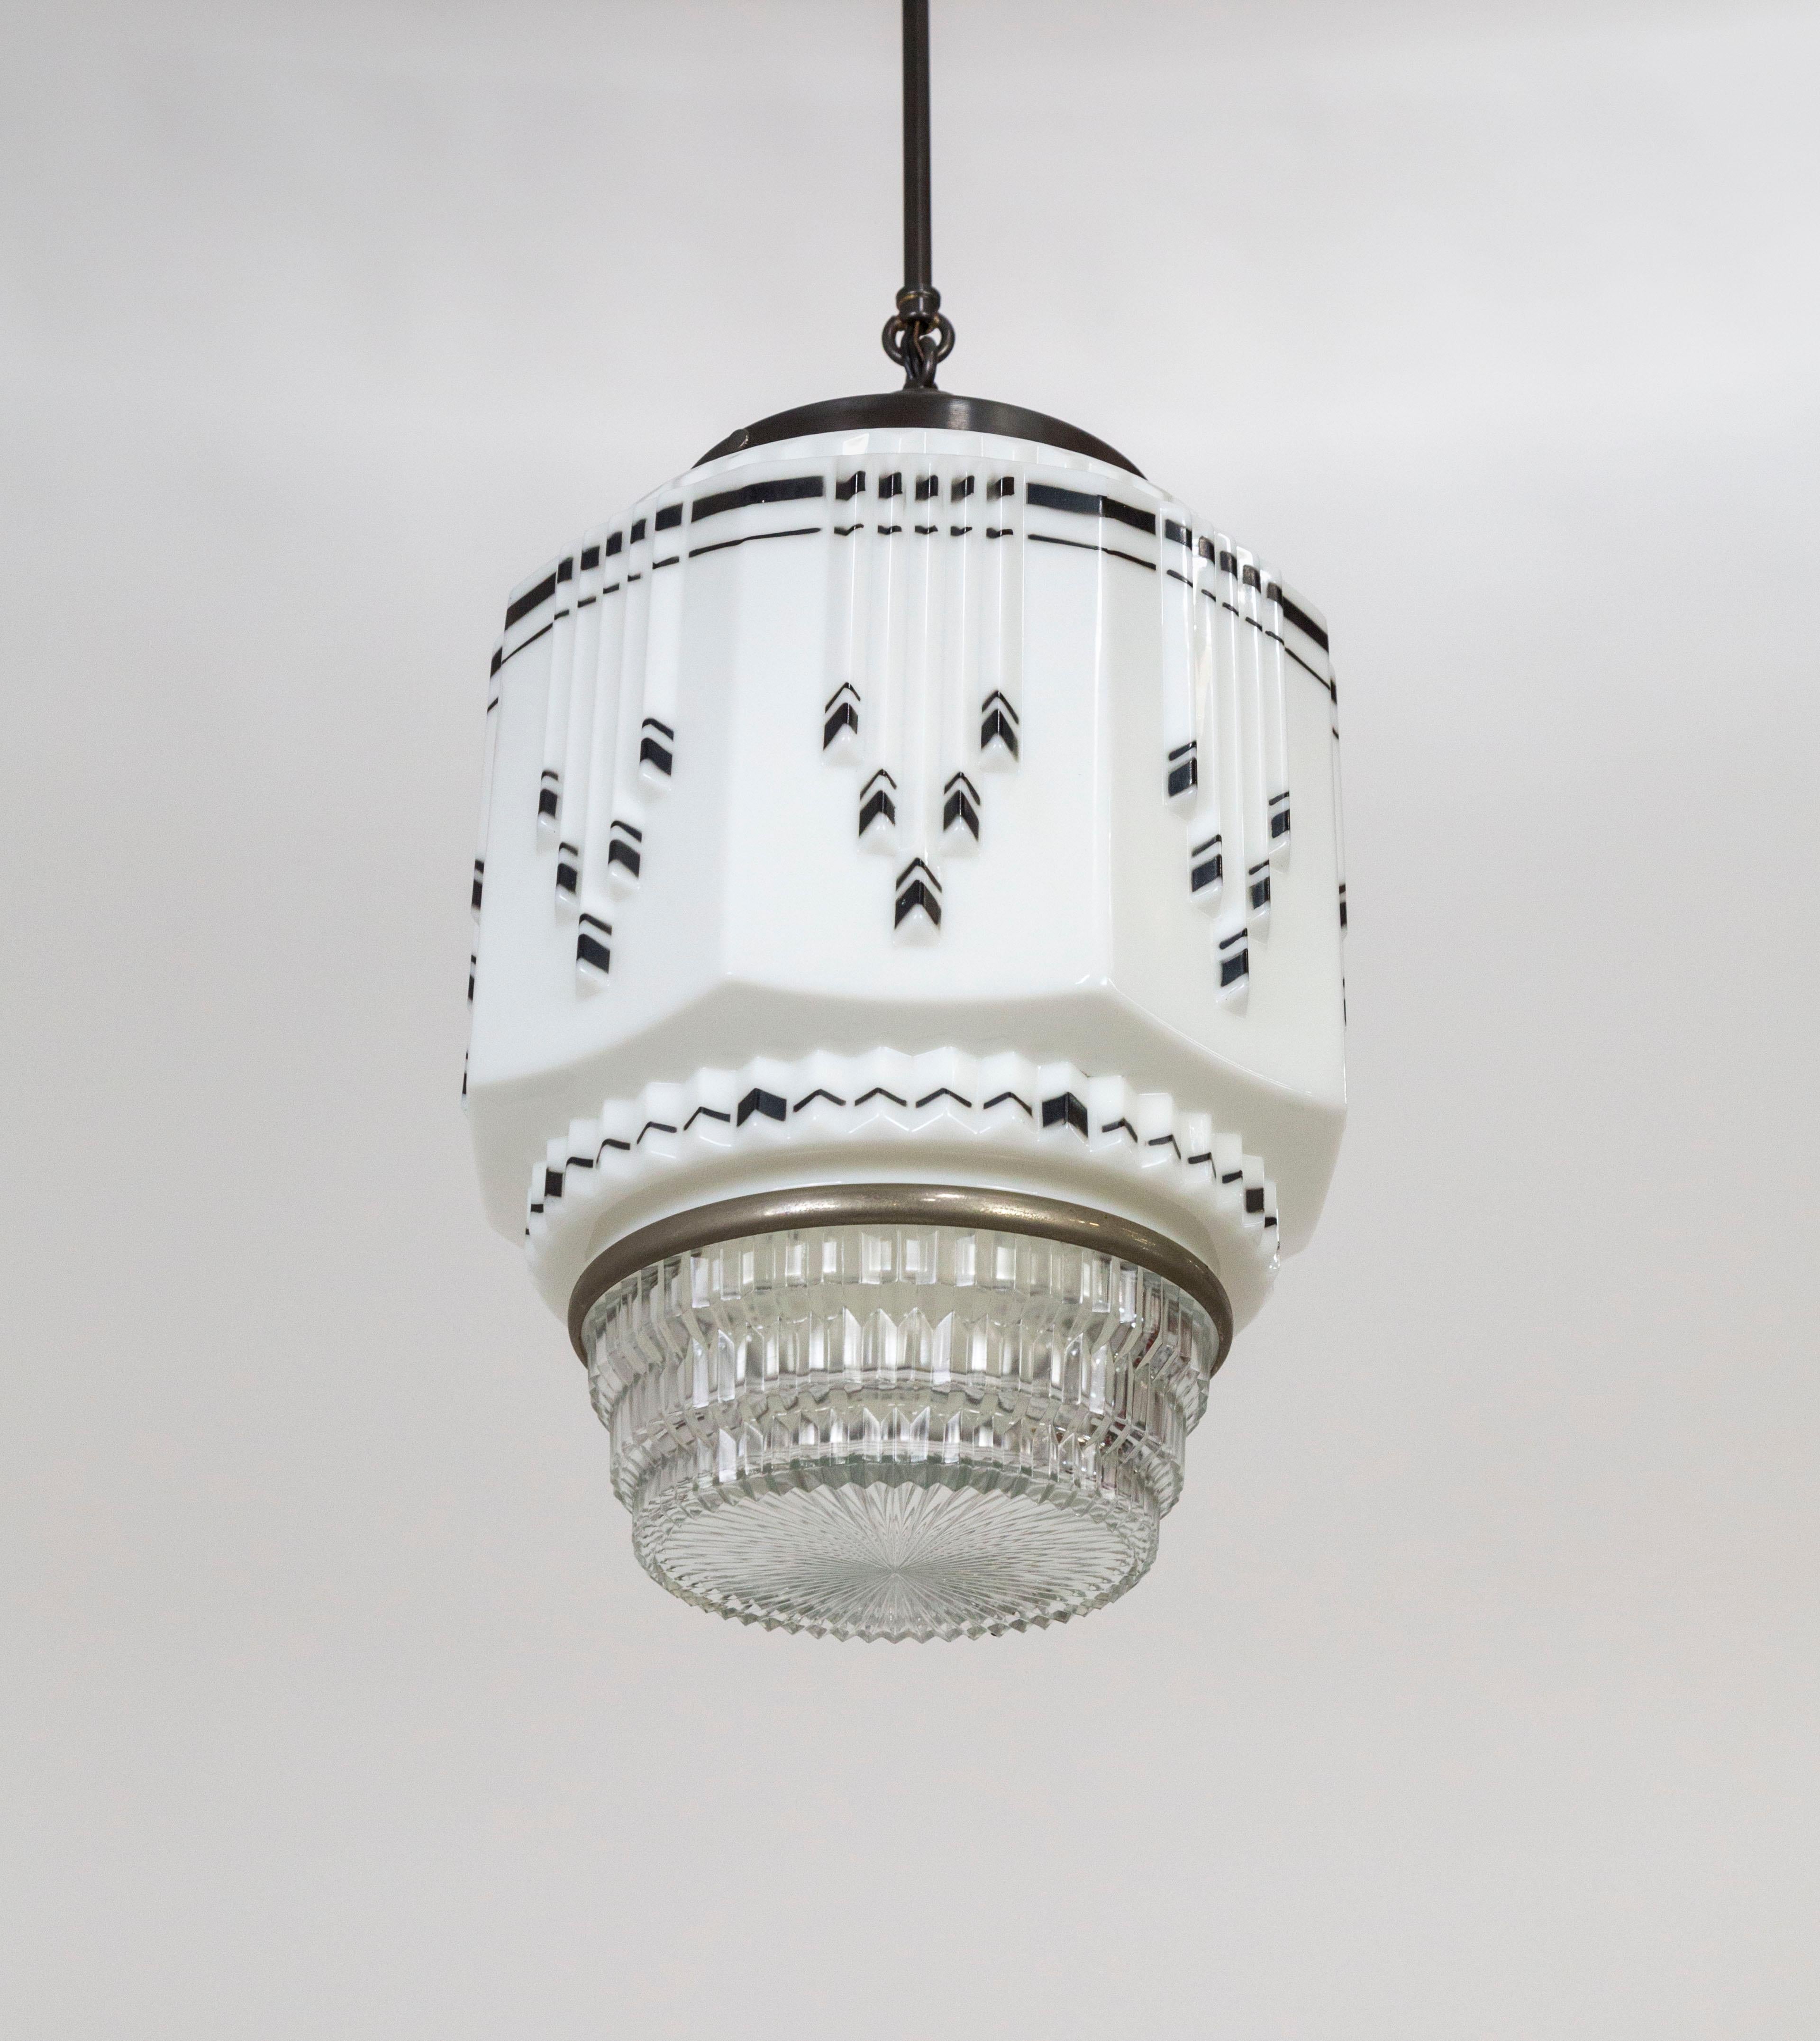 An Art Deco, cylindrical pendant light made of faceted, ridged, white, molded glass, accented with black stenciled zig-zags; with a chrome-rimmed base of clear, stepped, pressed glass with a radial texture. Held with a long, slender, brass stem and